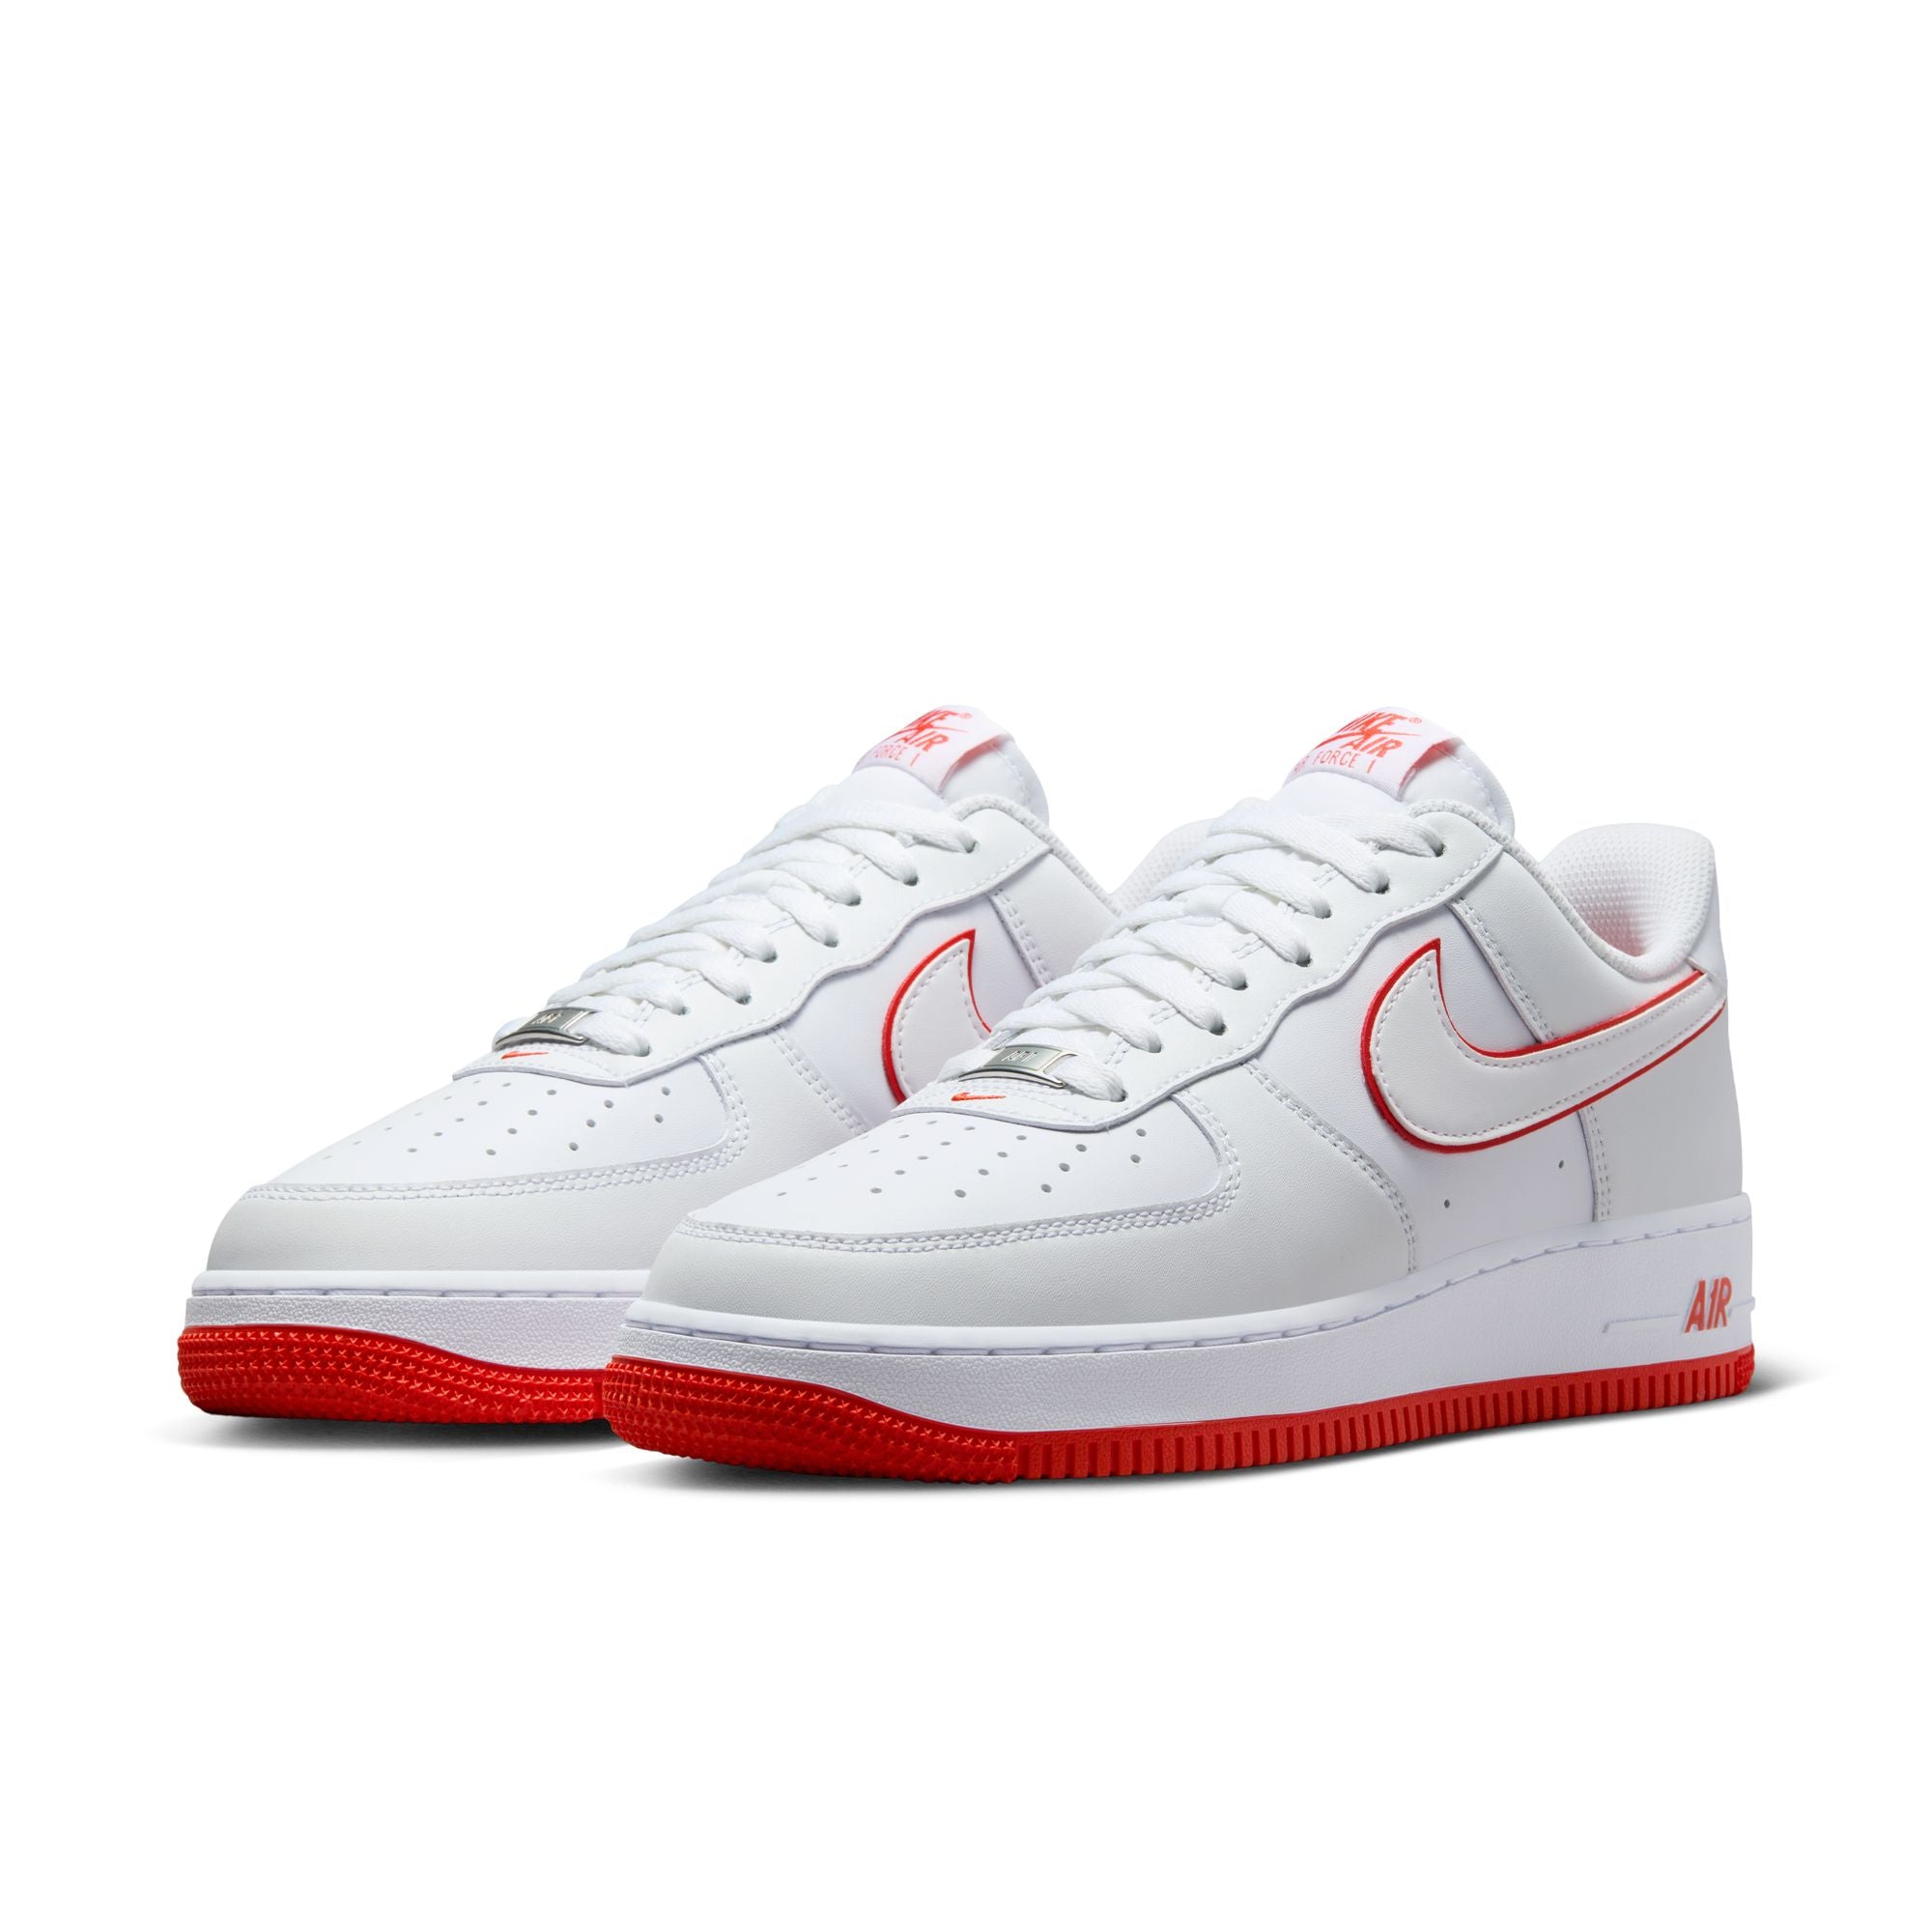 Nike Air Force 1 '07 Picante Red/Picante Red-White DV0788-600 Men's Size 13  Medium 